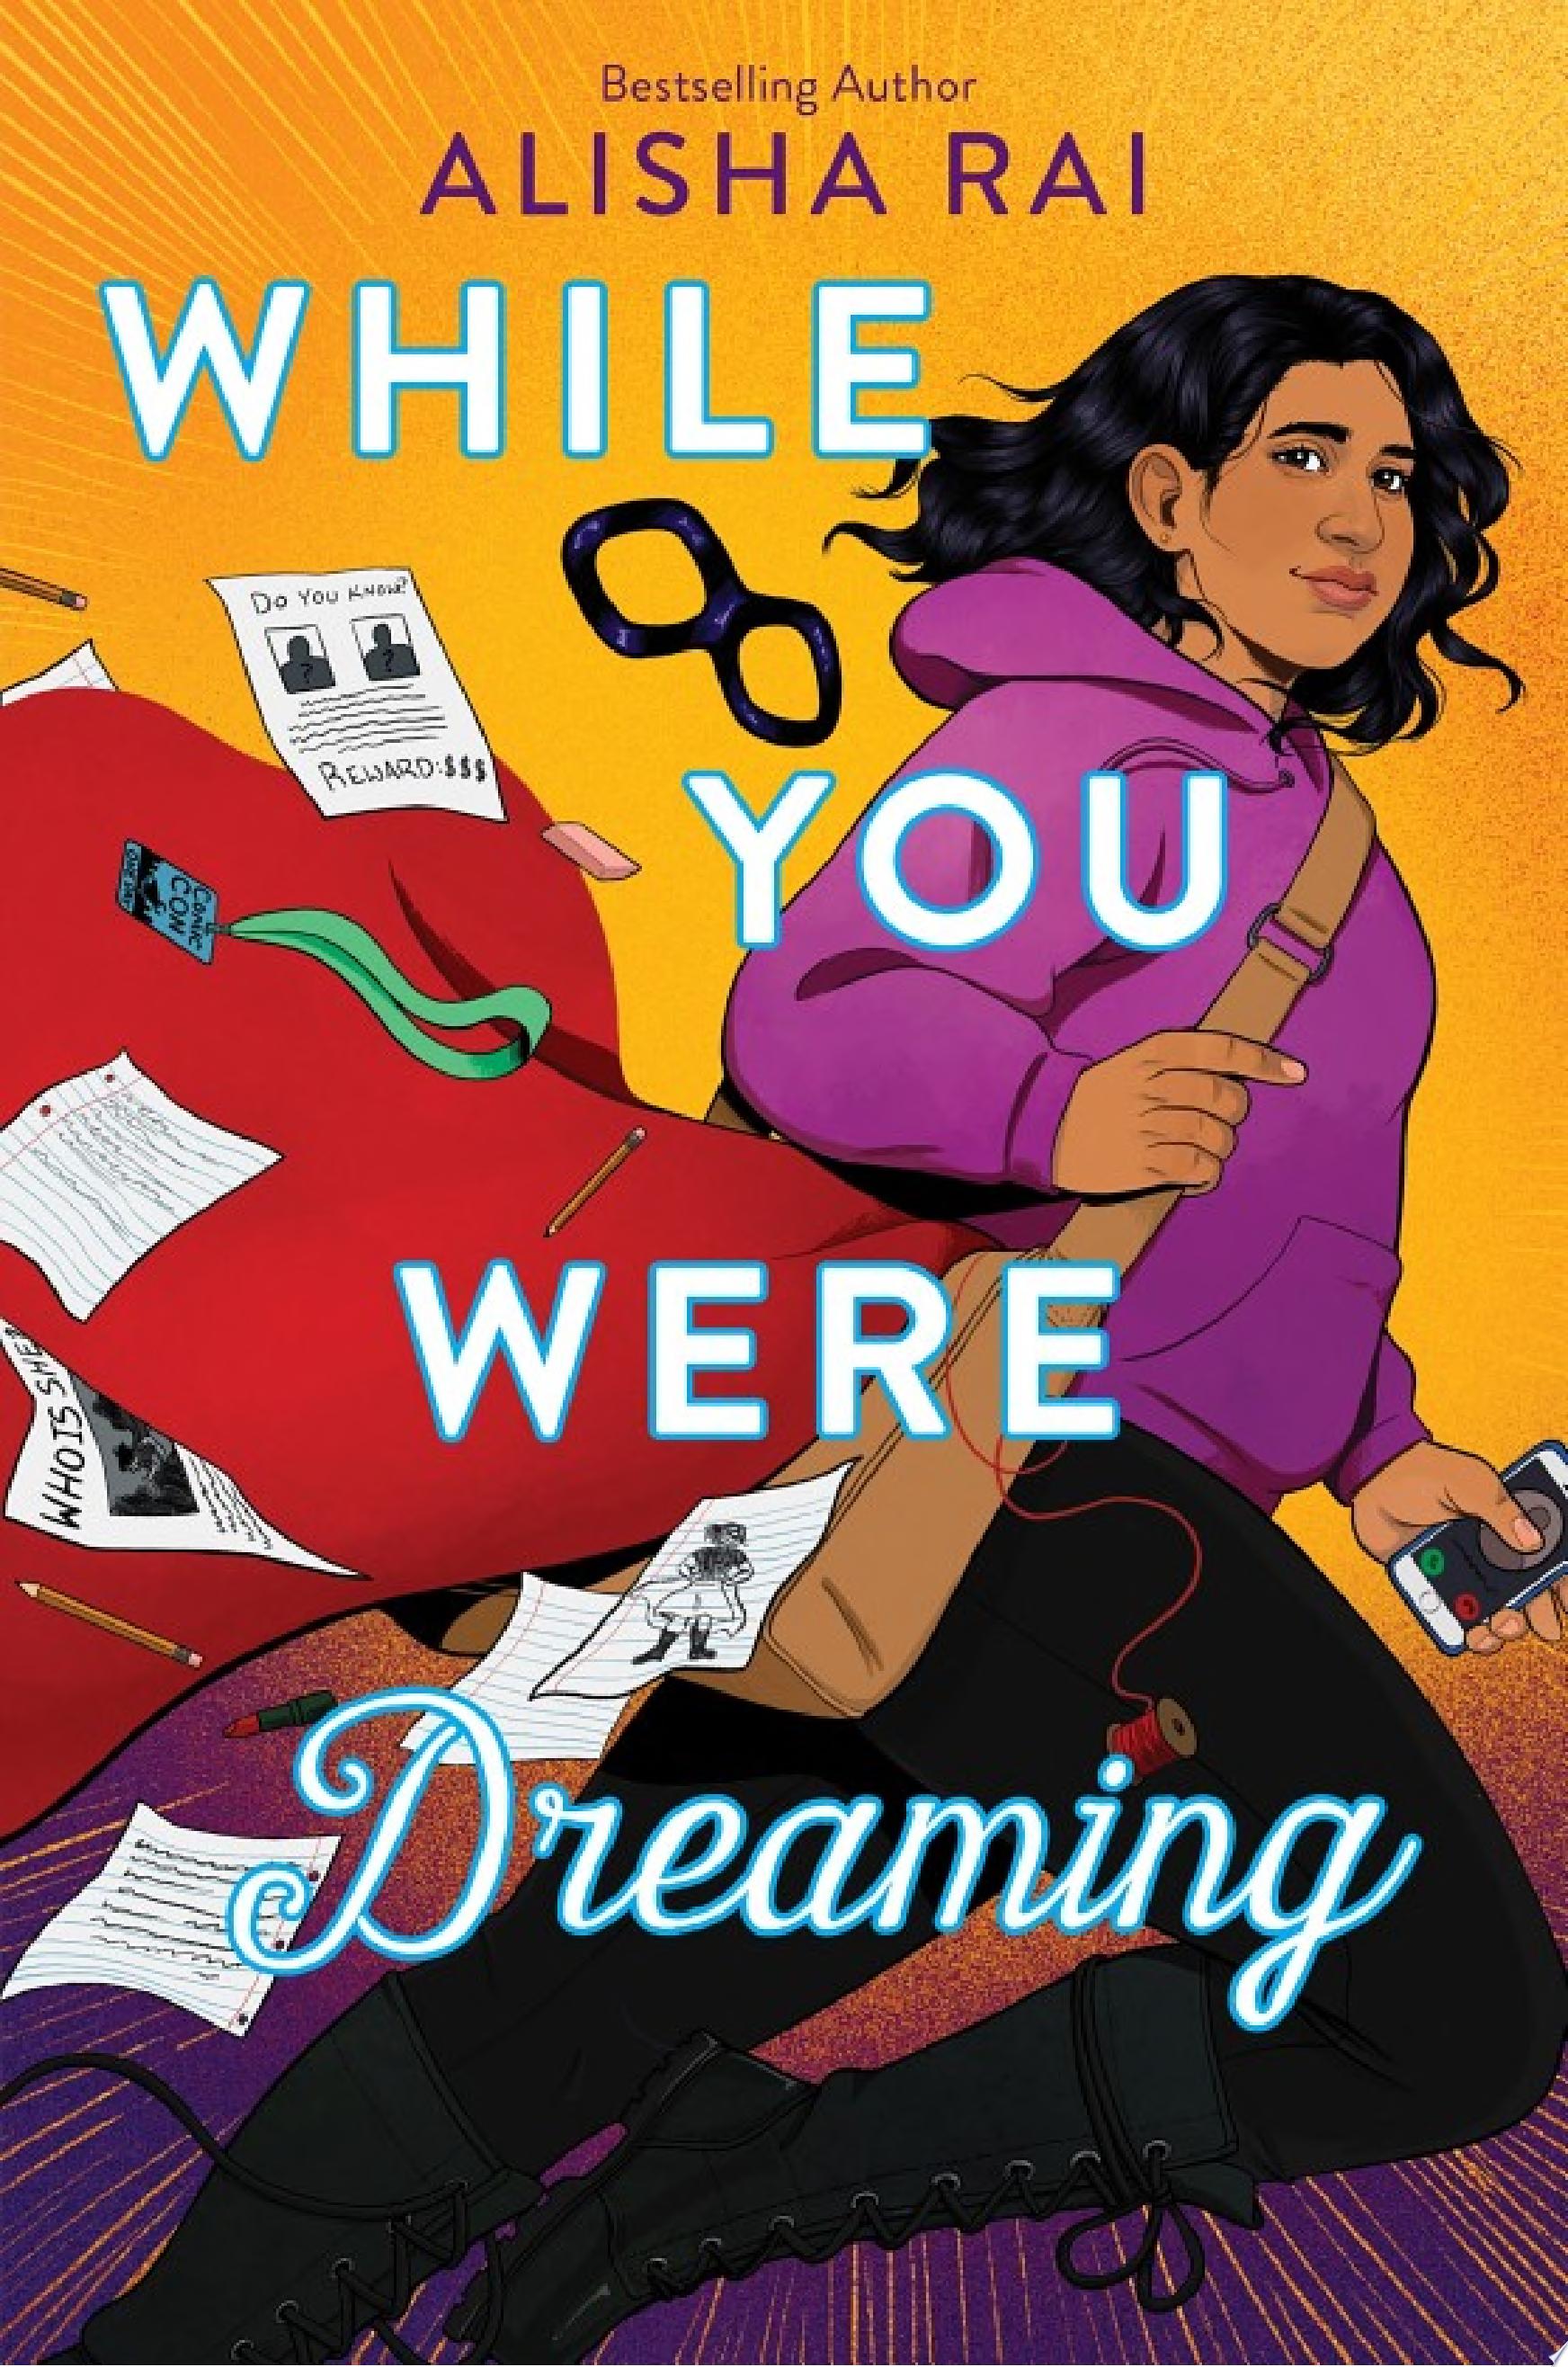 Image for "While You Were Dreaming"